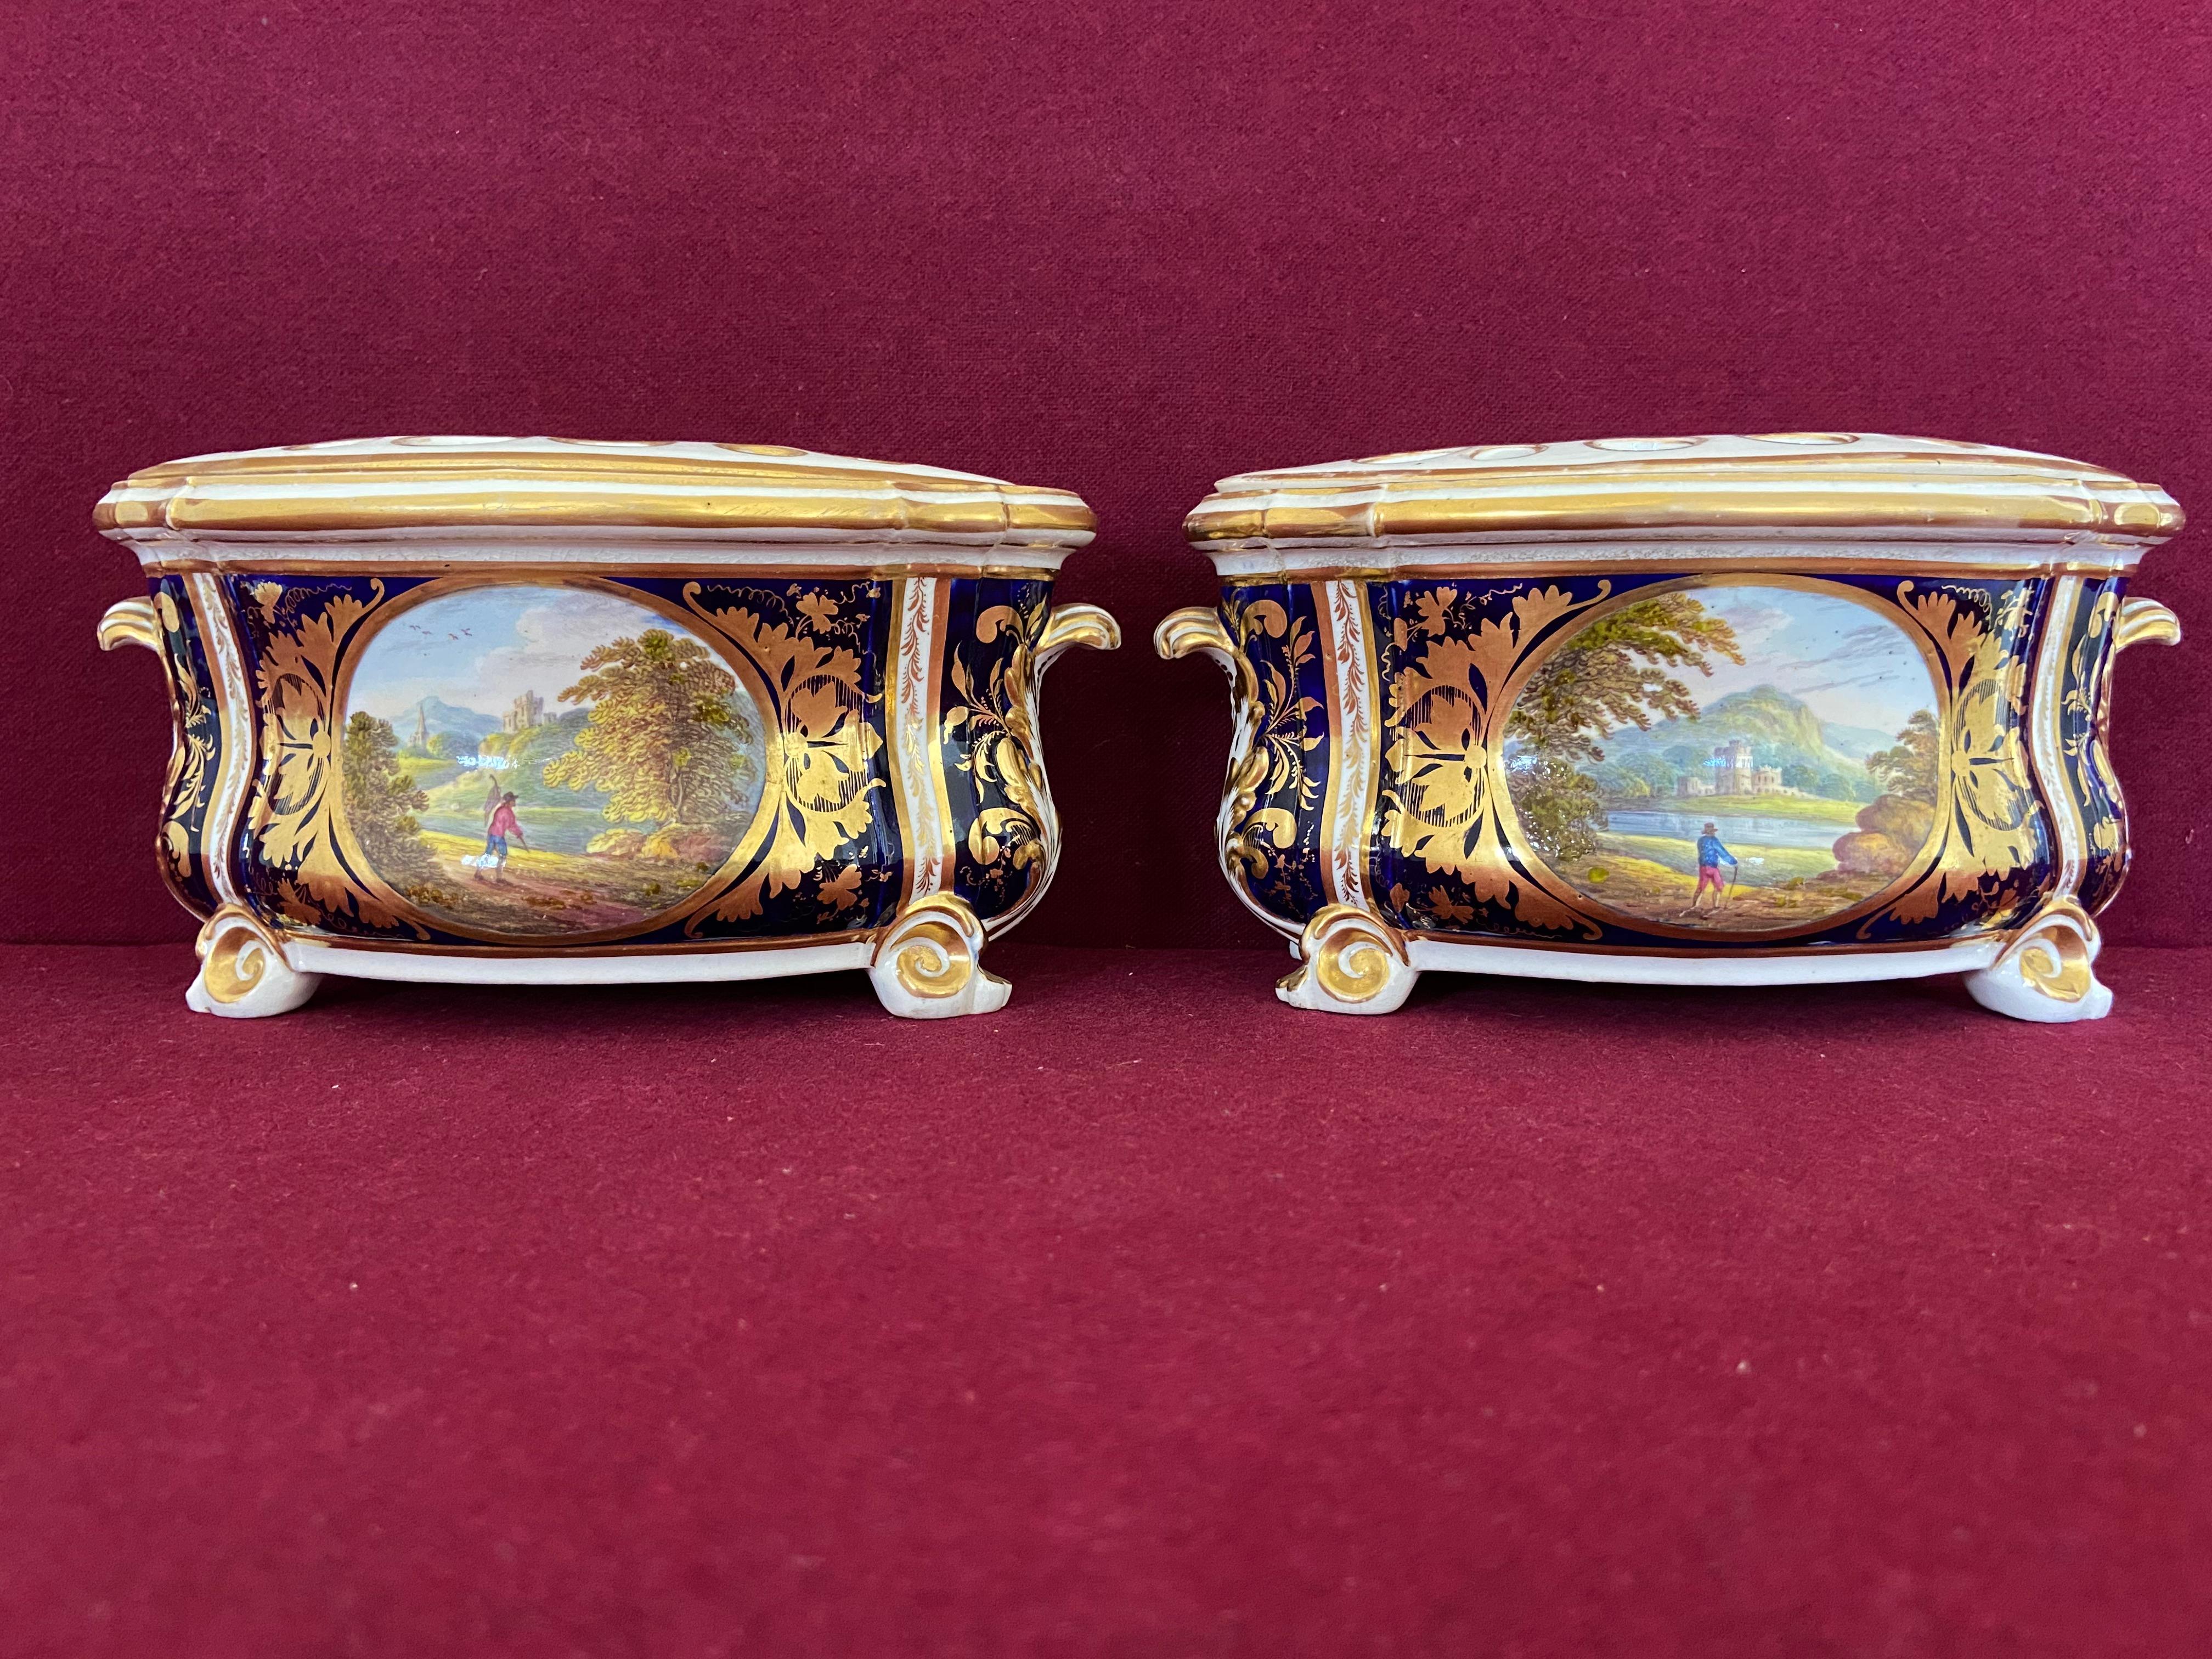 A fine pair of Derby bough pots c.1815 painted with topographical landscapes 'In Italy' probably by Robert Brewer.

Description in red on the base along with incised shape number 'No 76'.

Condition: Slight hairline crack to the base of one of